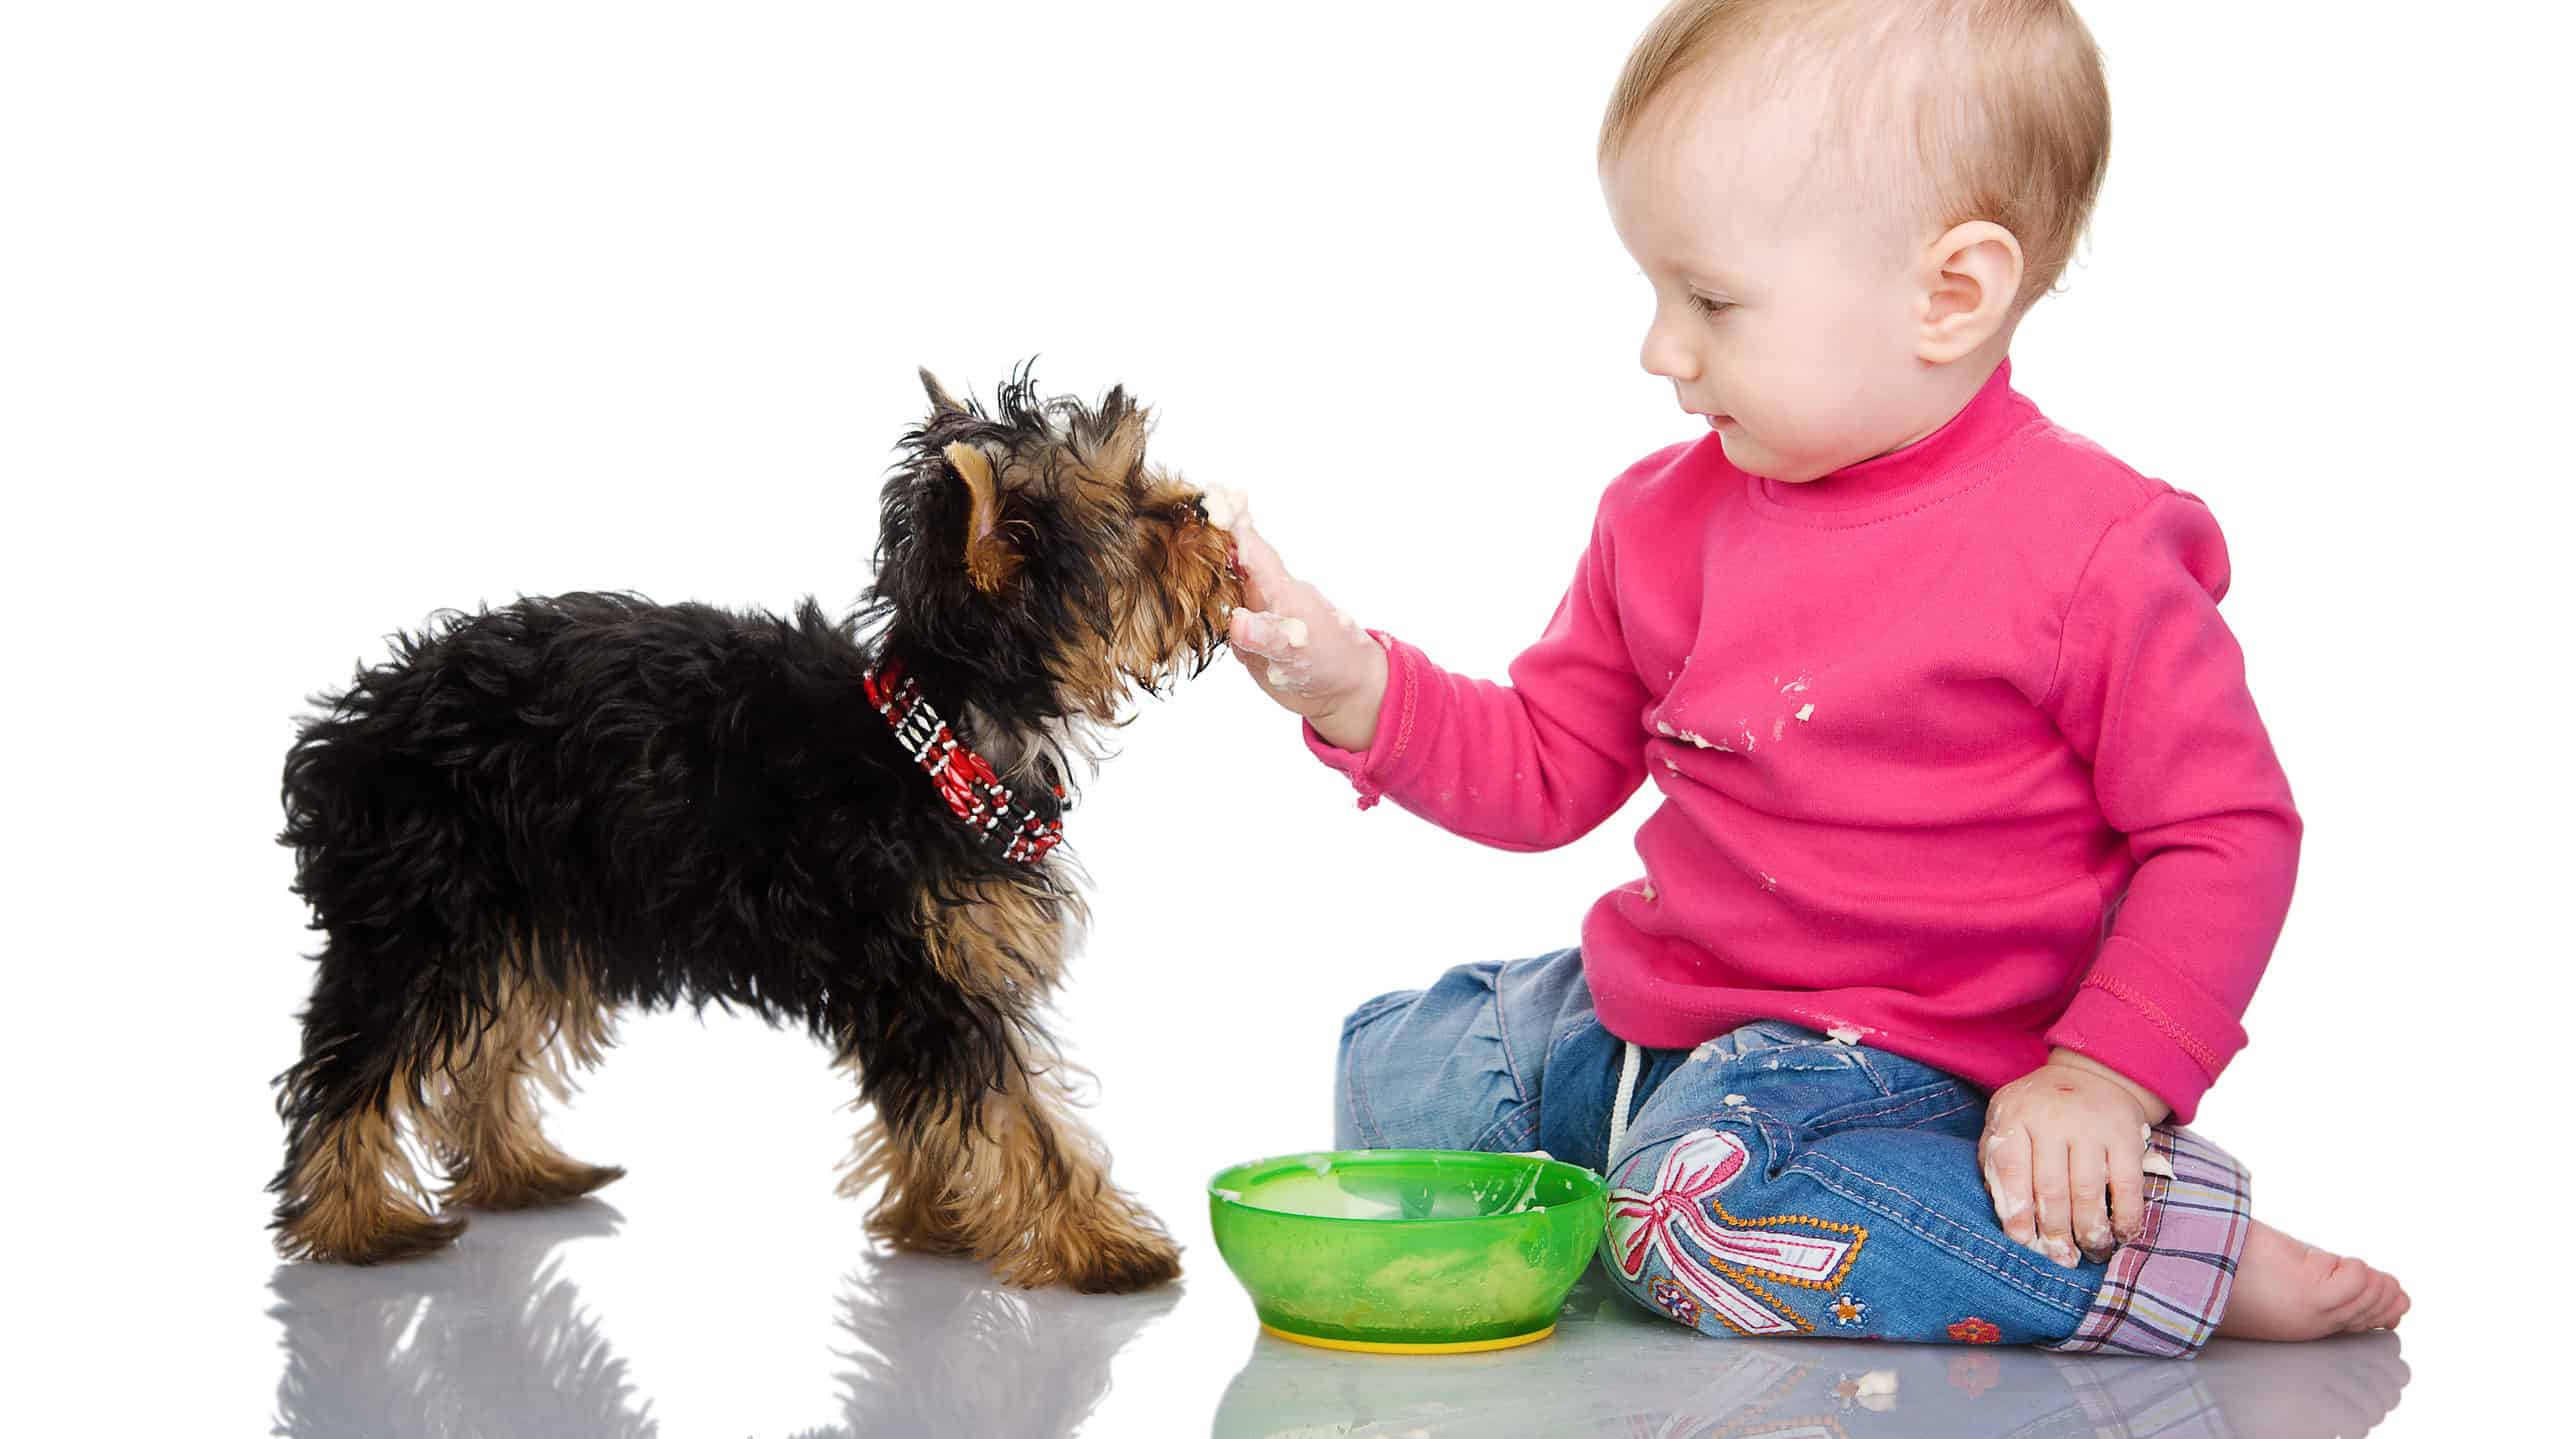 Dog being fed baby food